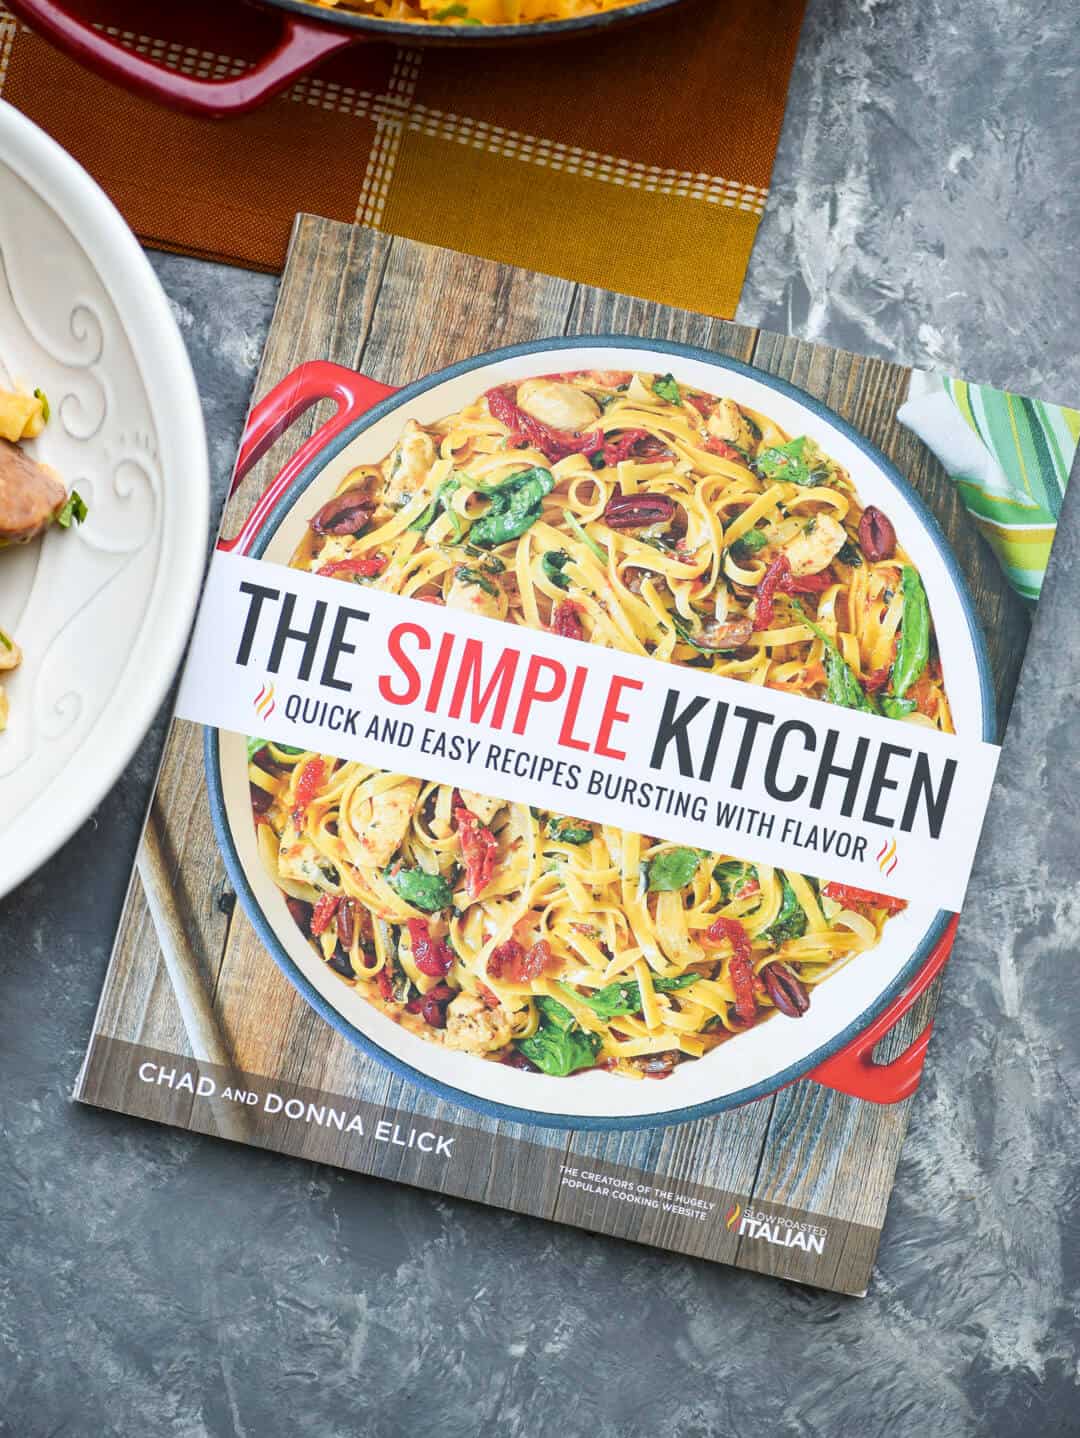 The Simple Kitchen cookbook.